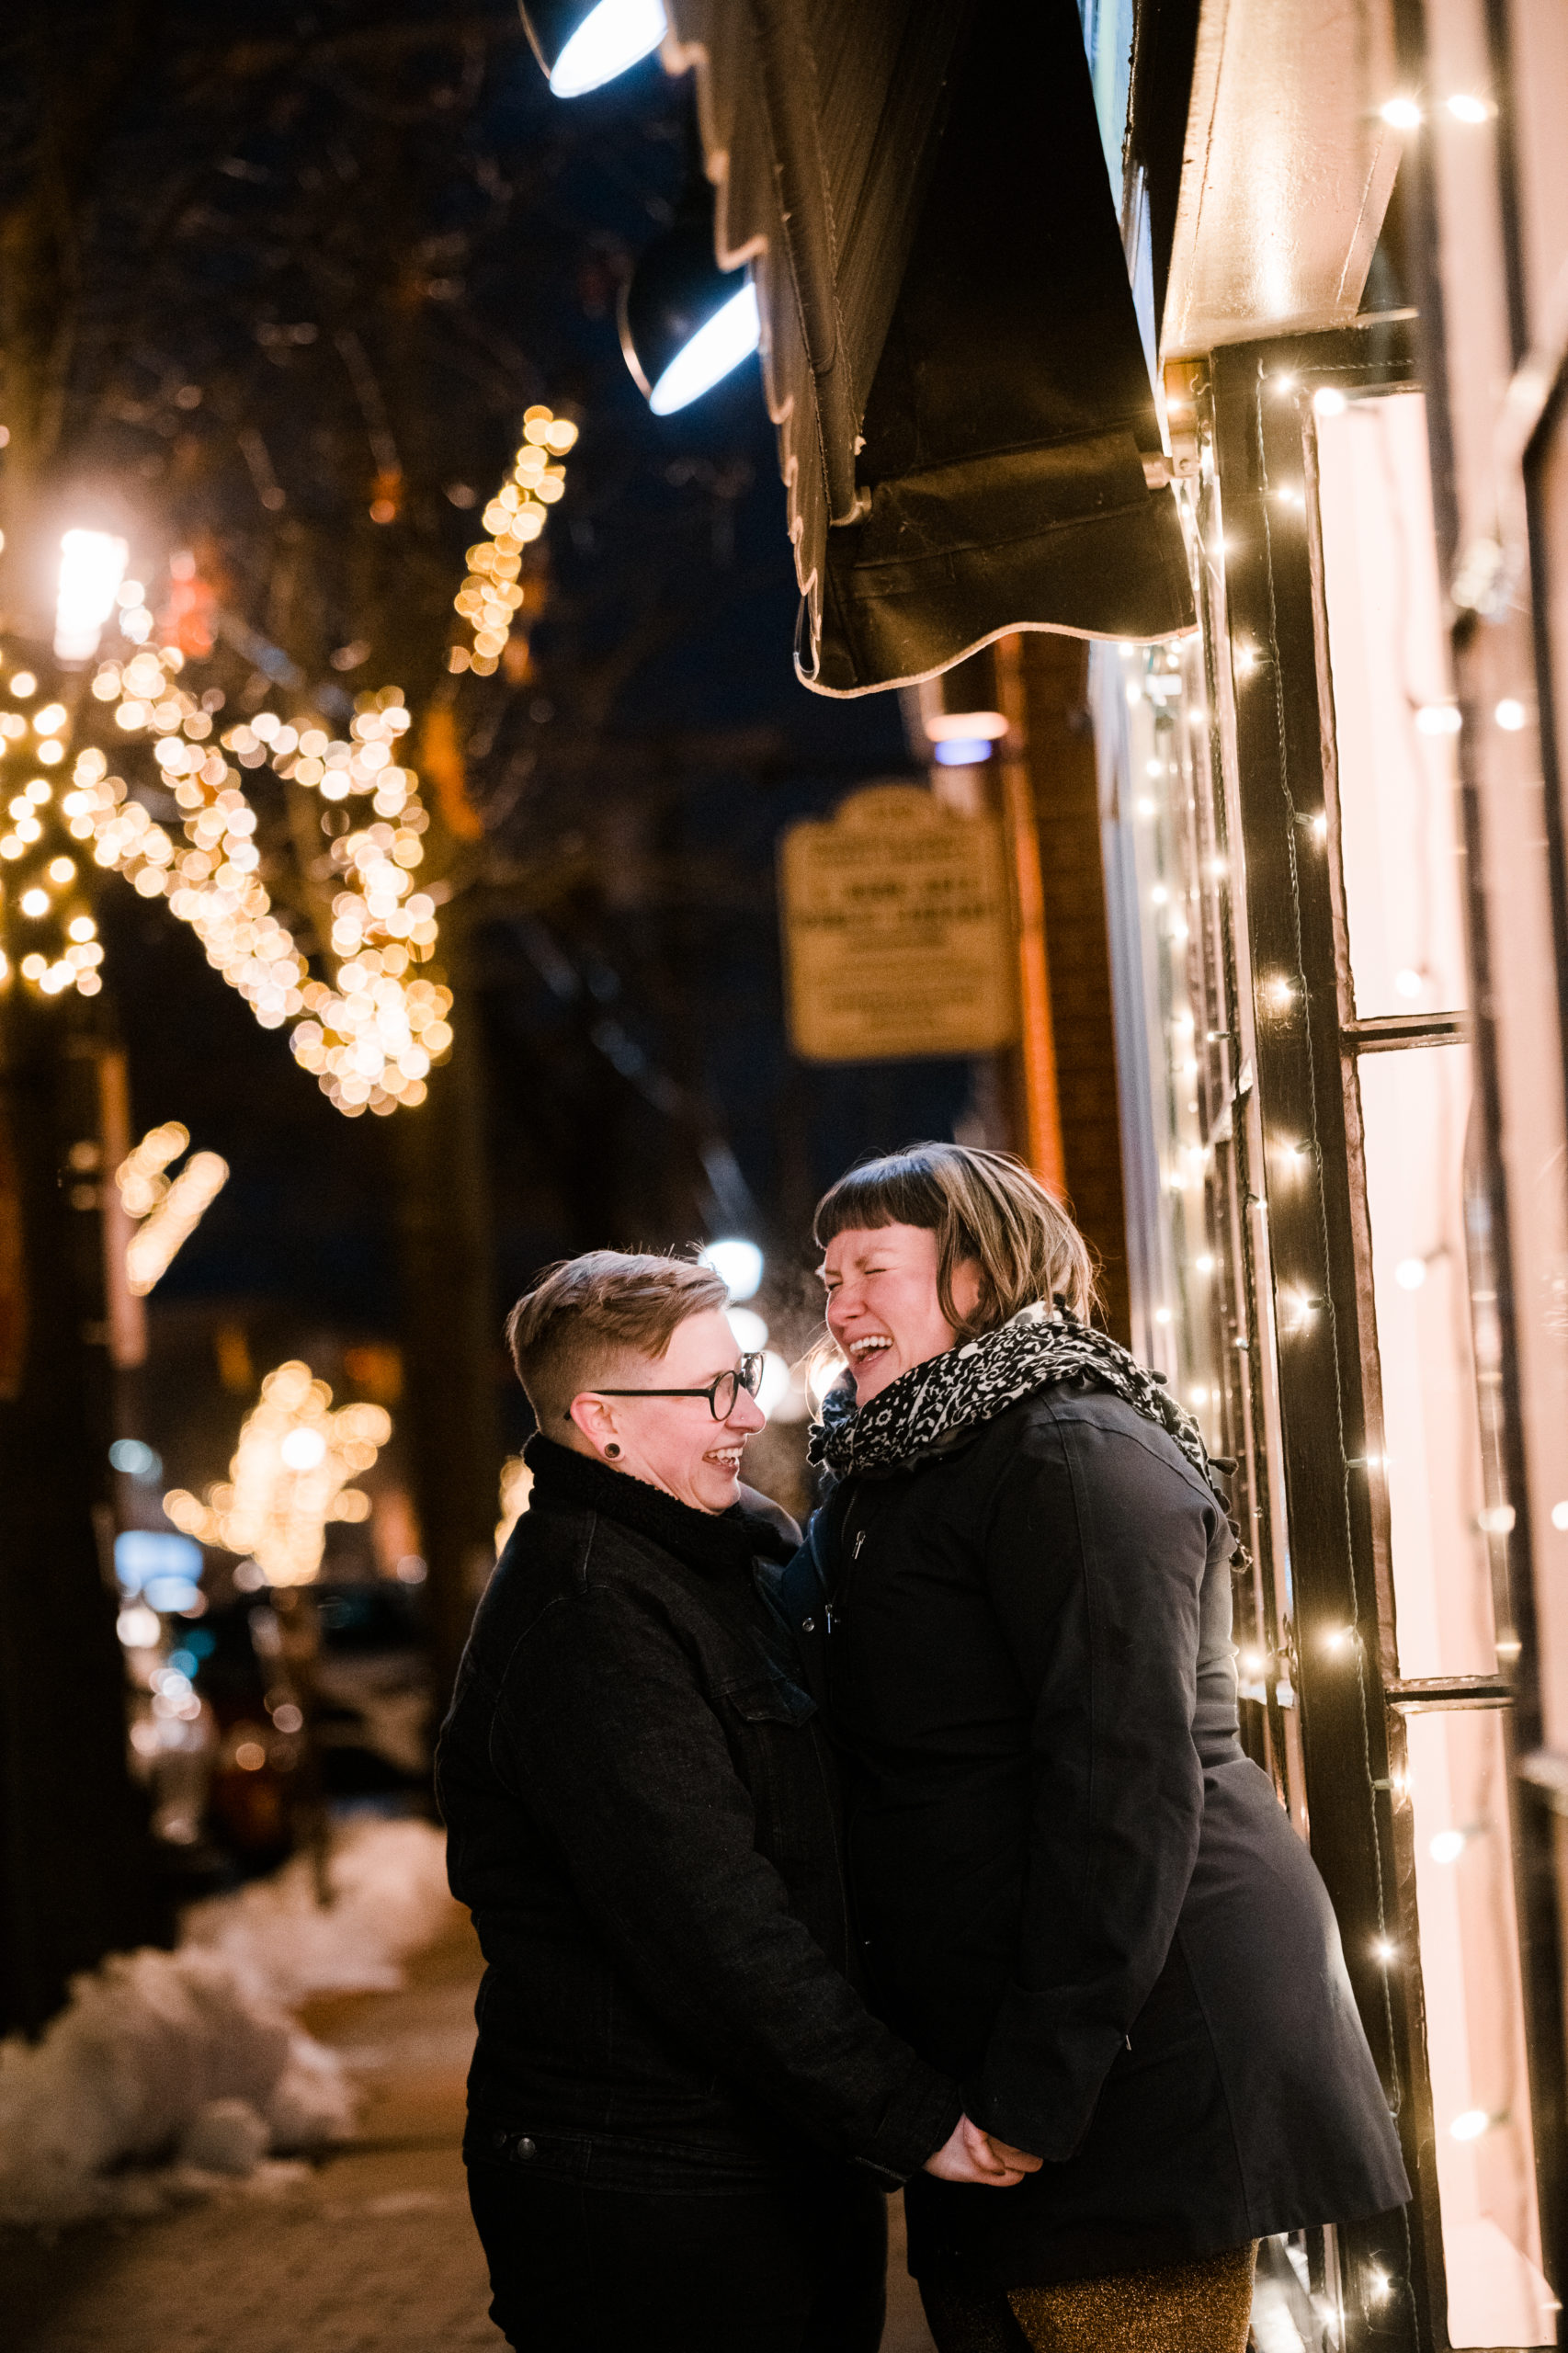 A couple embracing outside with holiday lights in the background